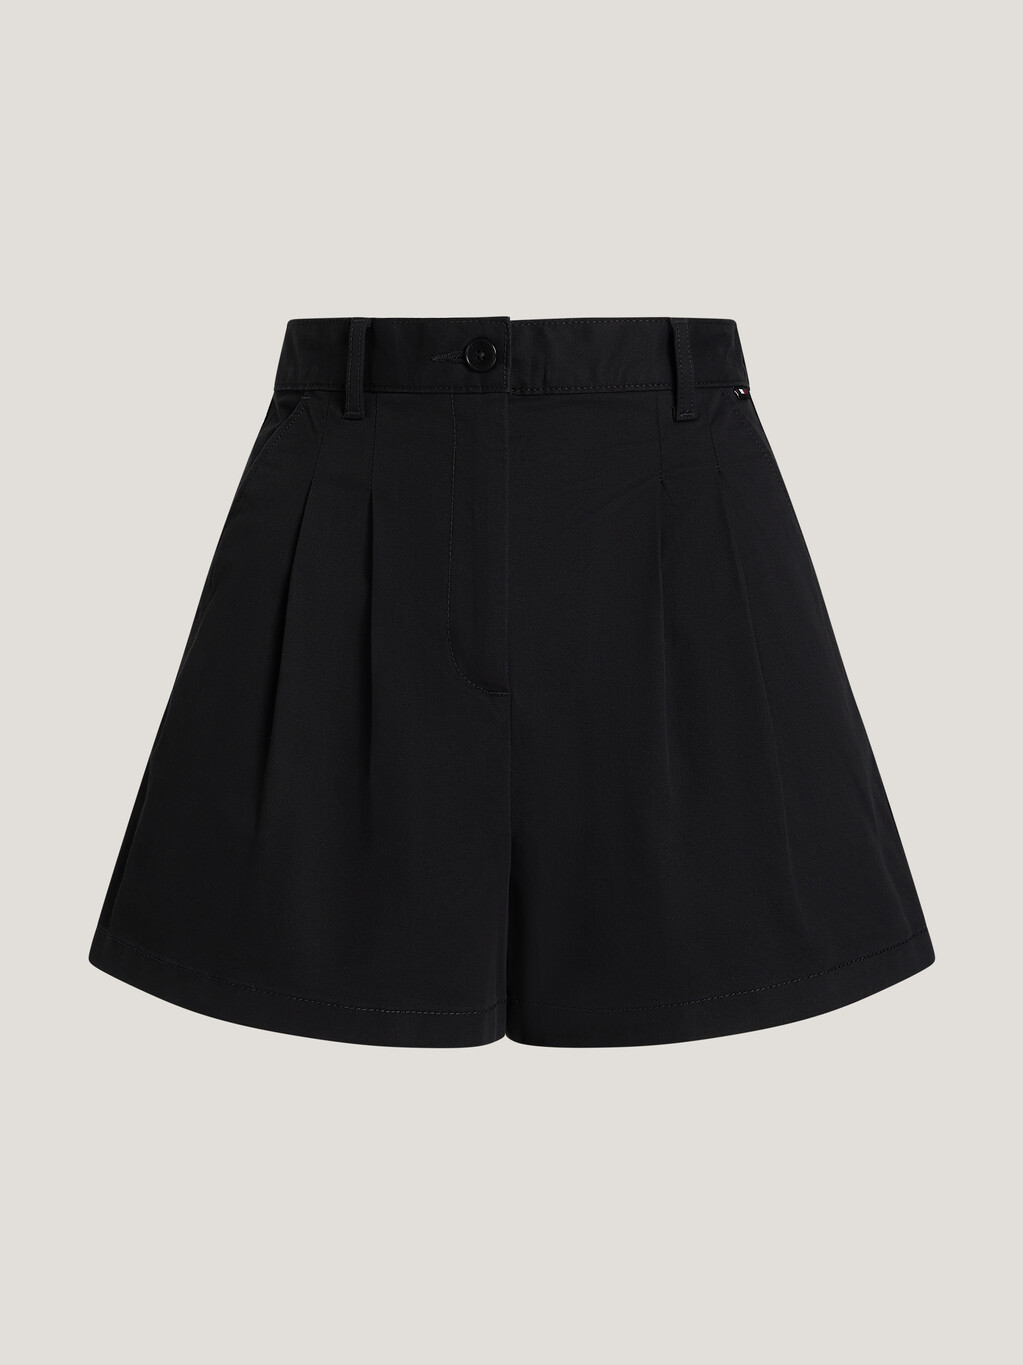 Claire Essential High Rise Pleated Chino Shorts, Black, hi-res